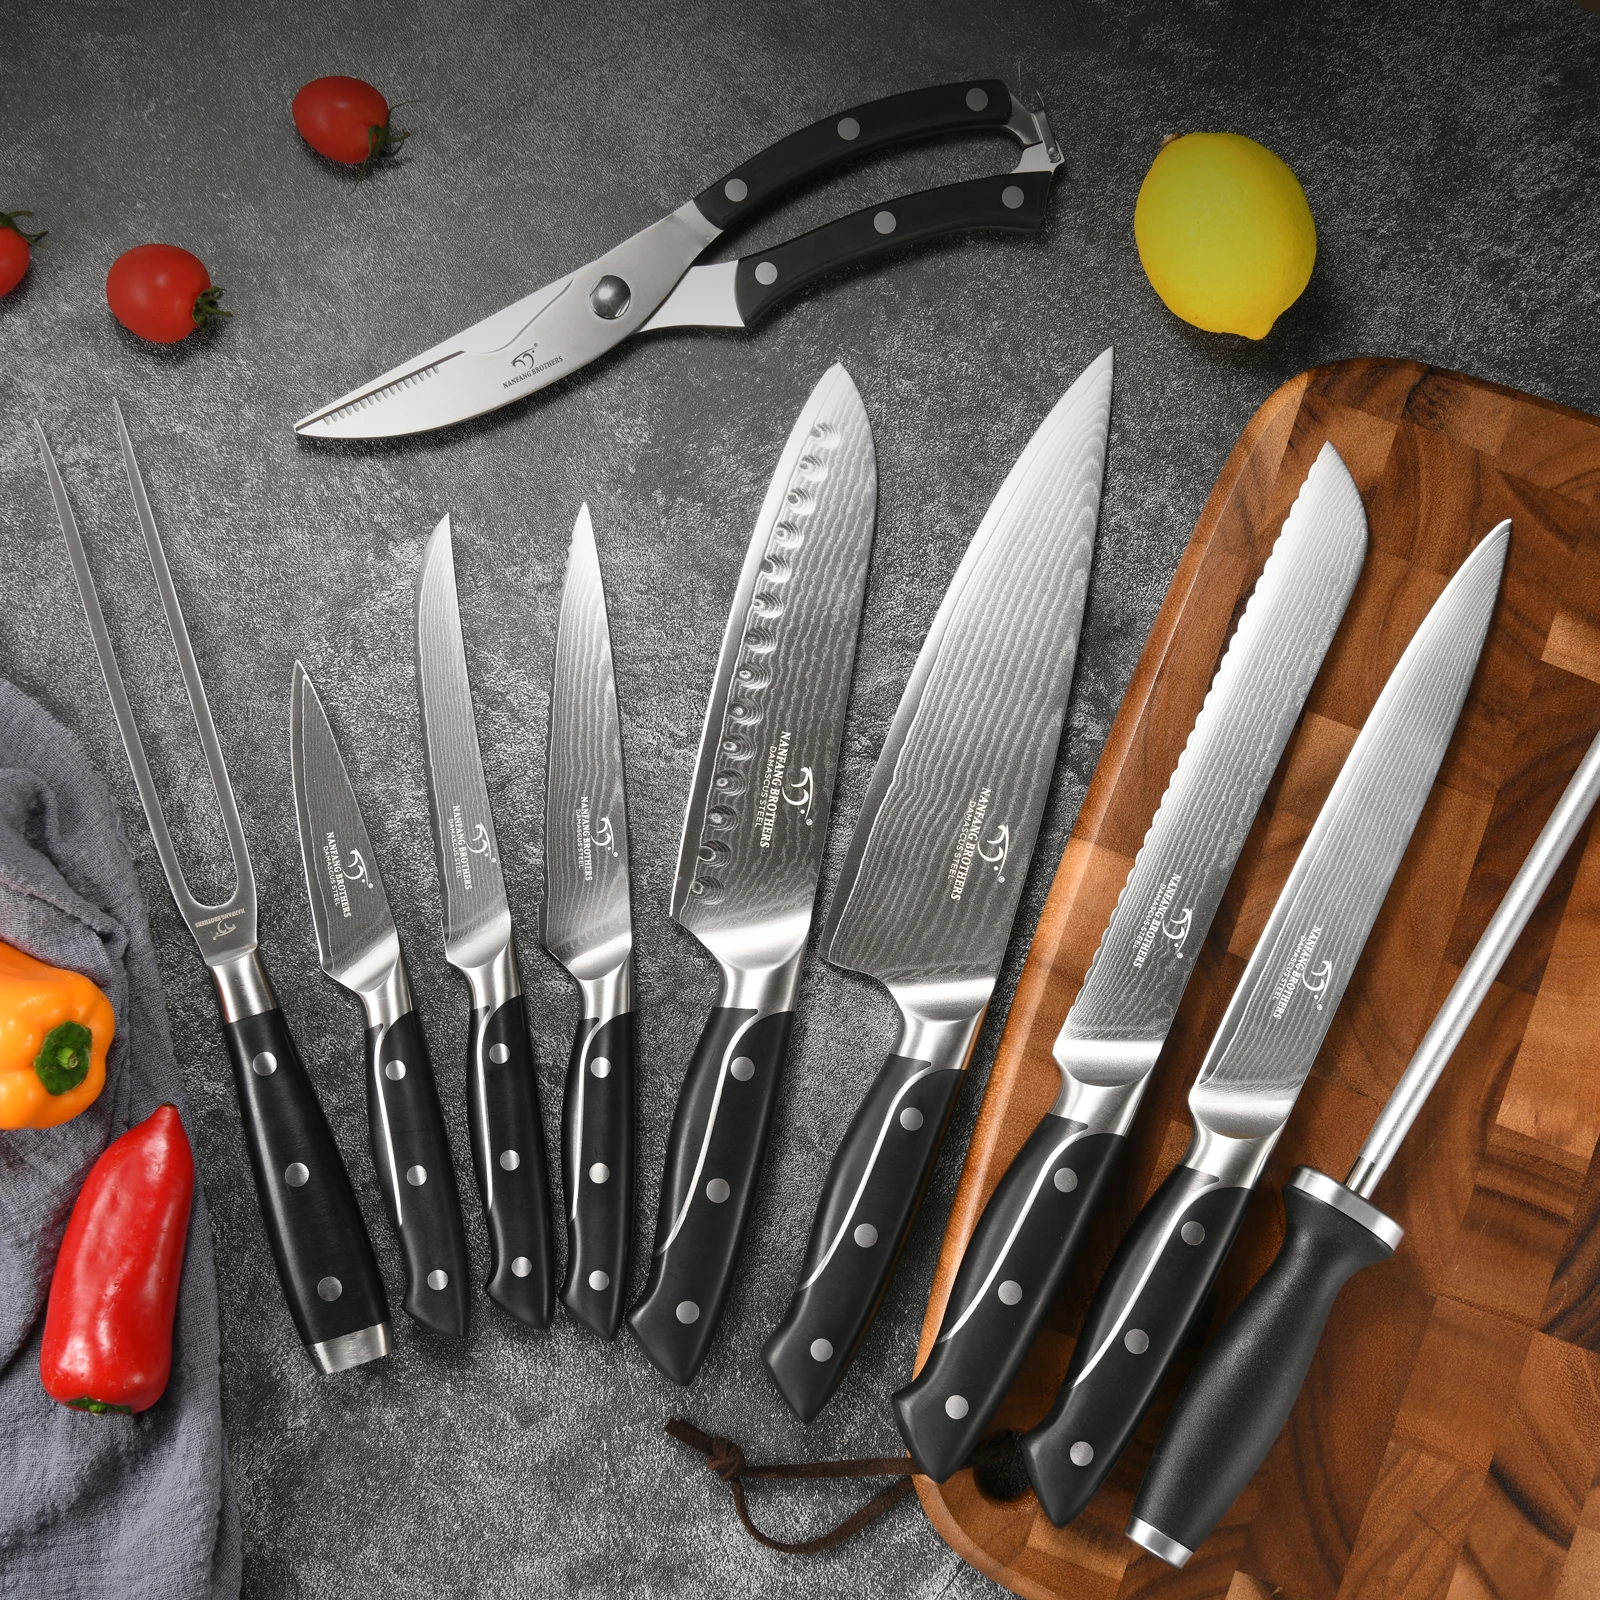 https://ae01.alicdn.com/kf/S81c812f7983540ec94a630a5251bb521e/Hot-Selling-18-Pieces-Damascus-Steel-Cutlery-Kitchen-Knife-Set-Premium-Santoku-Cleaver-Knives-with-ABS.jpg